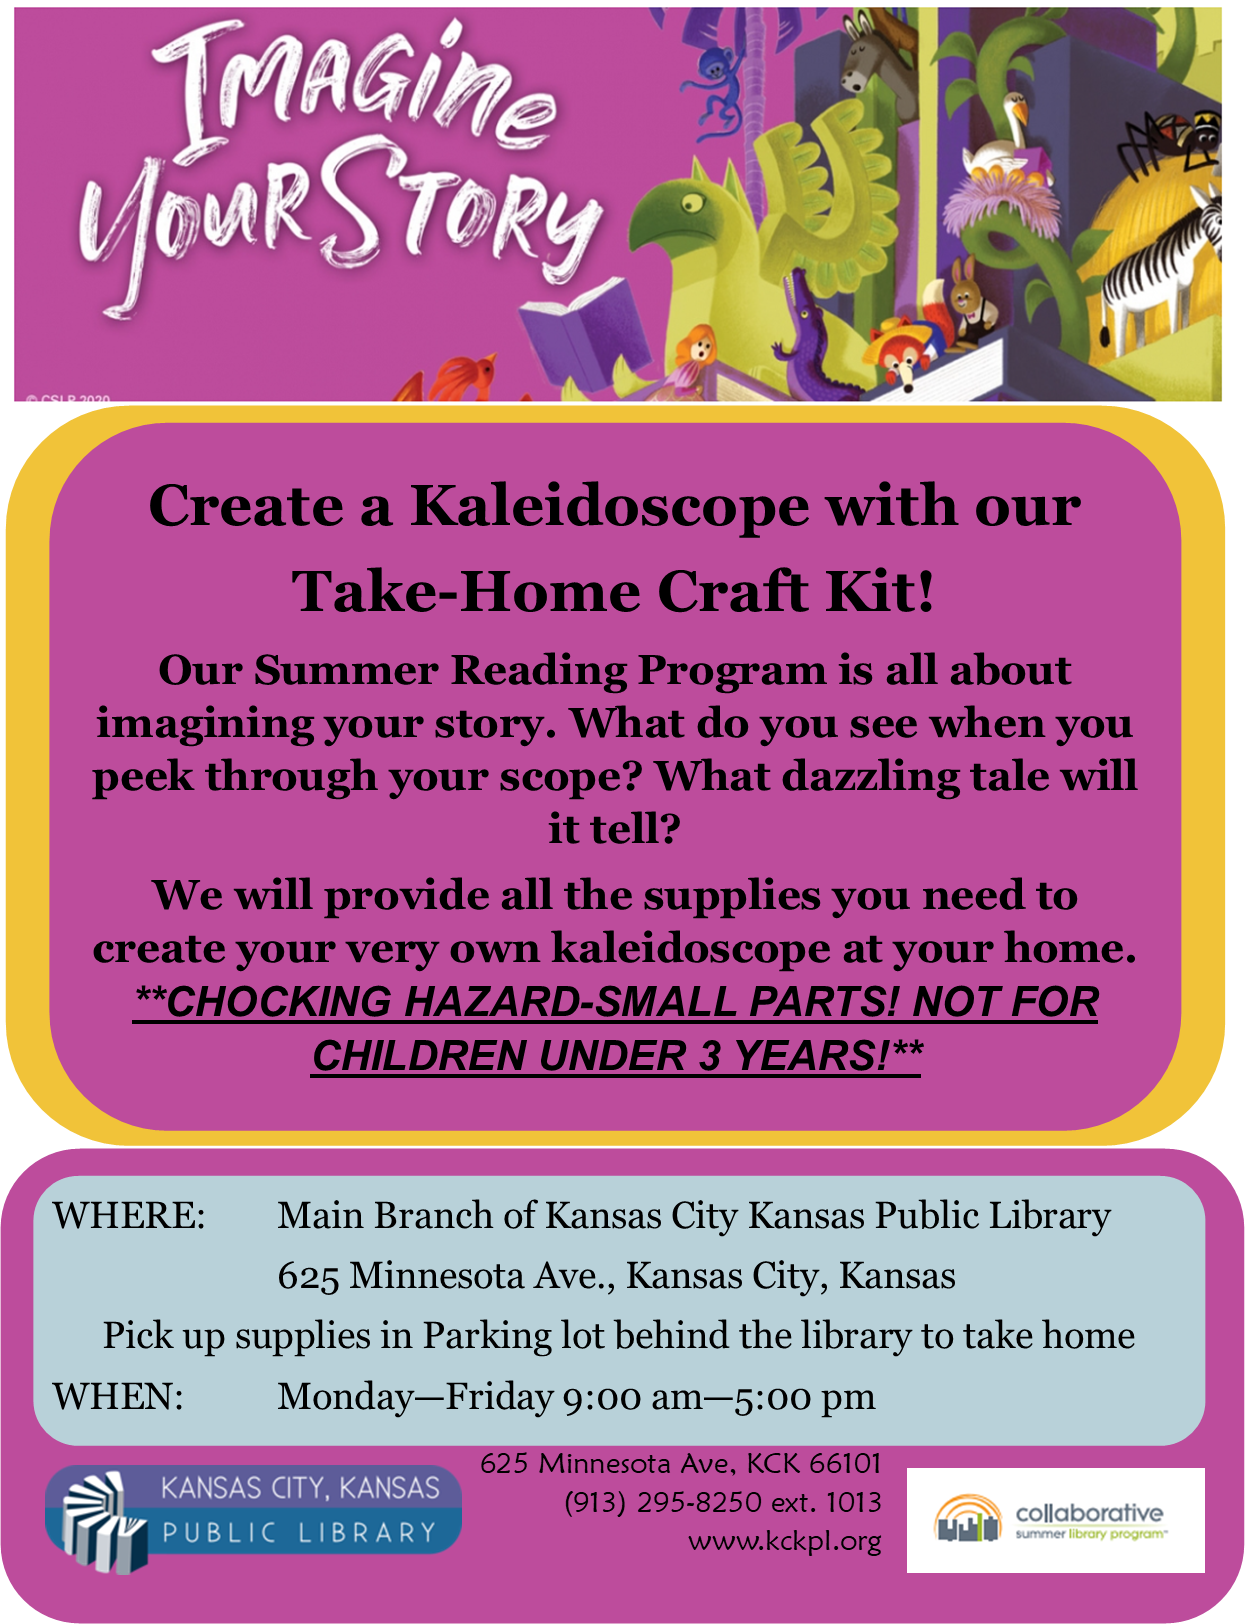 Create a kaleidoscope with our Take-Home Craft Kit! We will provide all the supplies you need to create your very own Kaleidoscope at your home. Starting 6/22/20 through 6/26/20 between 9am and 2pm at the Main Branch Location pick the craft up via curbside while supplies last. 